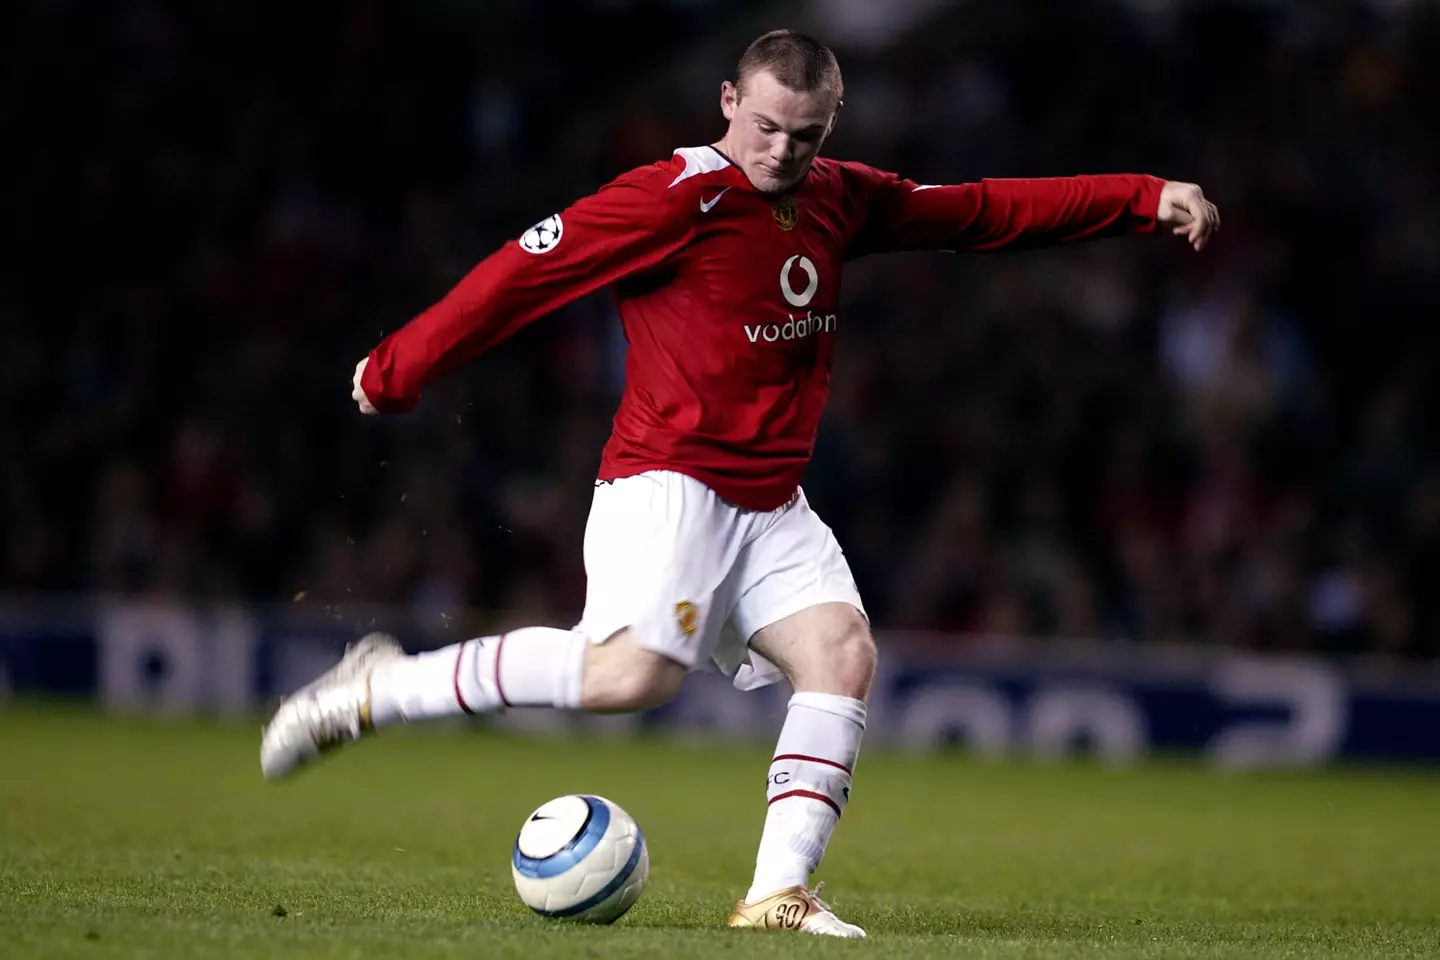 Wayne Rooney in his Manchester United debut against Fenerbahce in the Champions League, where he bagged a hat-trick (Alamy)